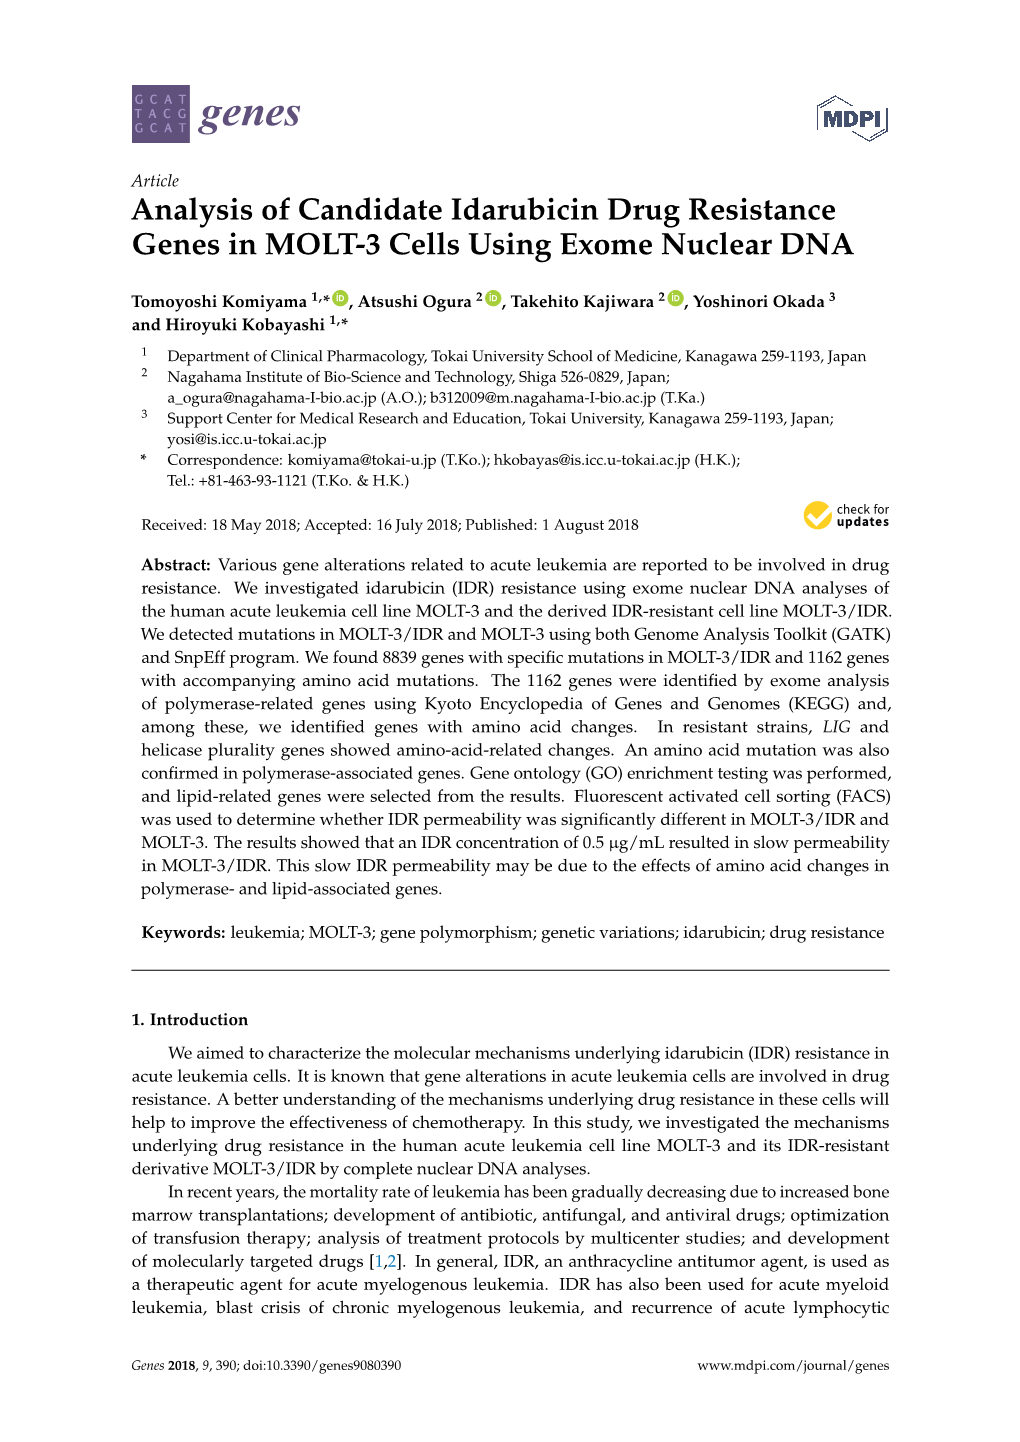 Analysis of Candidate Idarubicin Drug Resistance Genes in MOLT-3 Cells Using Exome Nuclear DNA